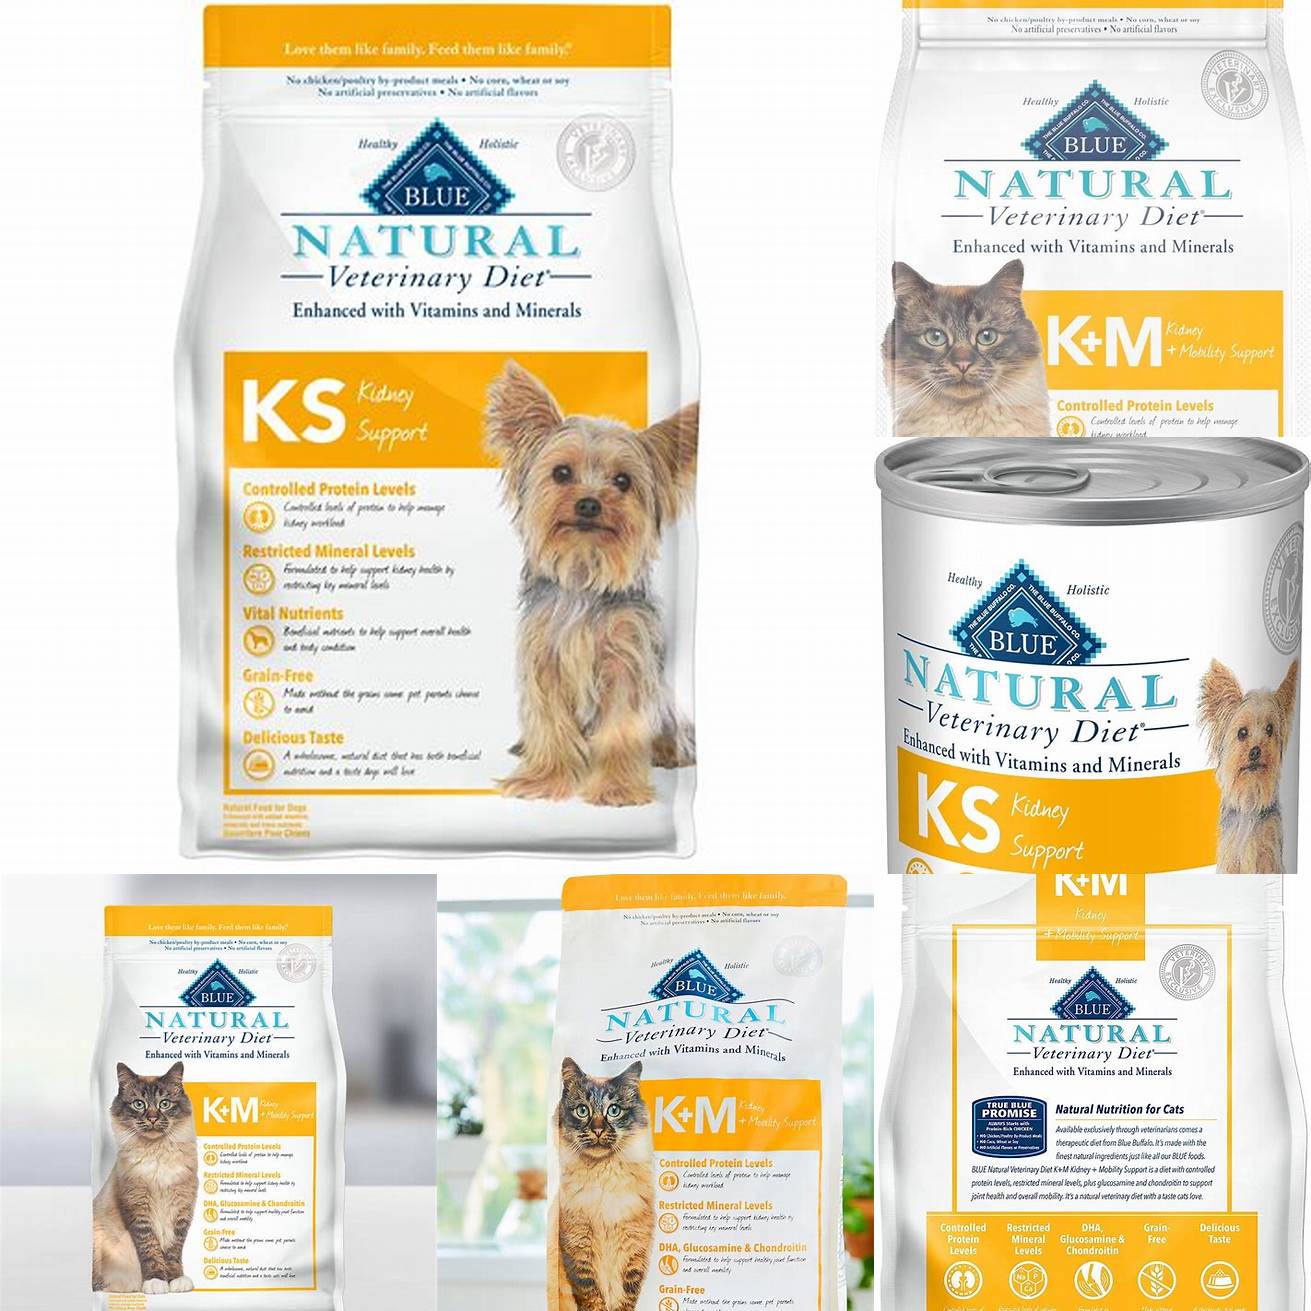 3 Blue Buffalo Natural Veterinary Diet Kidney Support for Cats